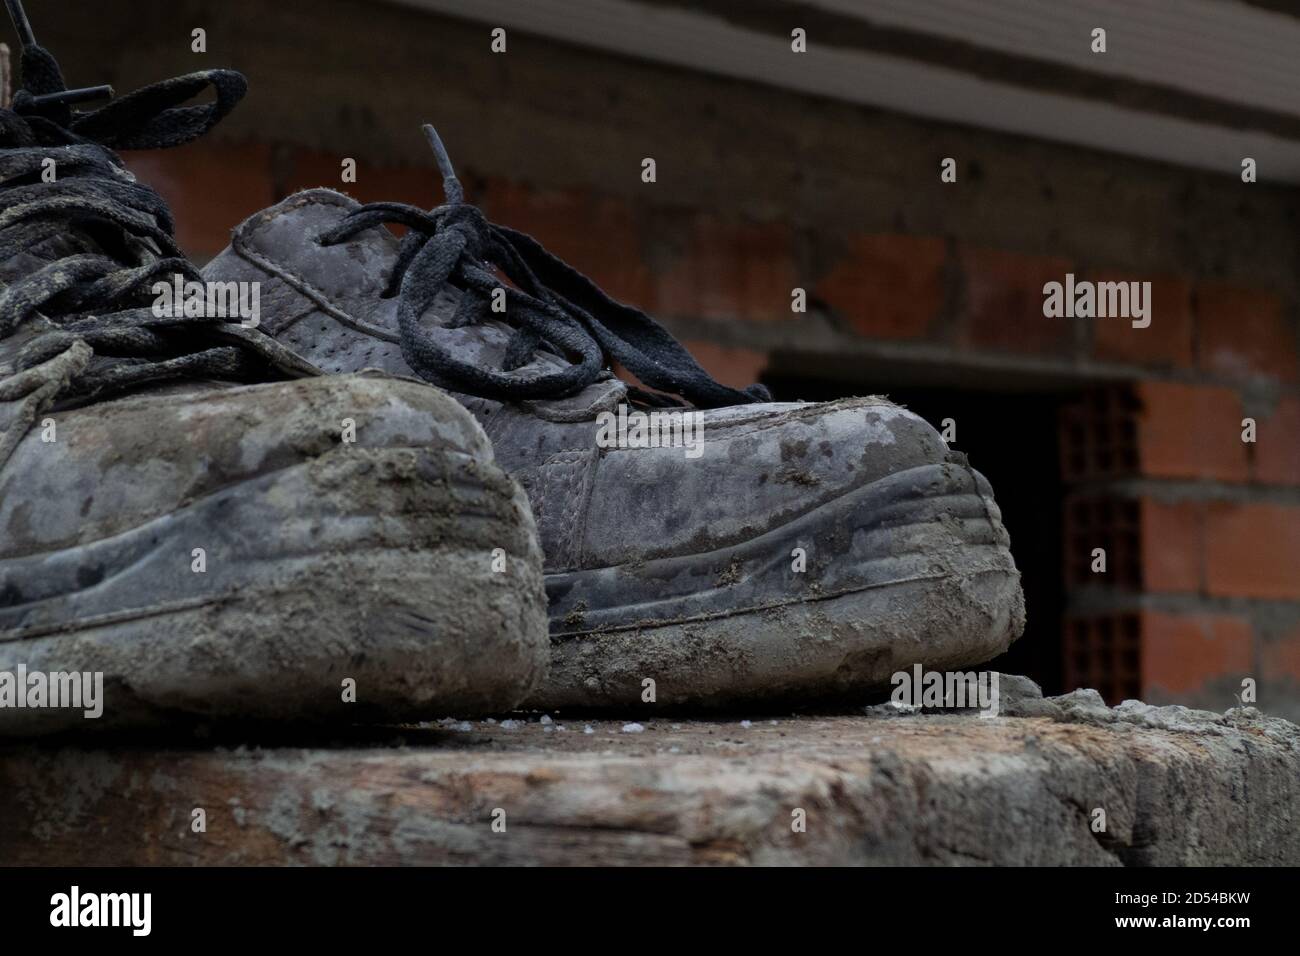 a pair of dirty working boots Stock Photo